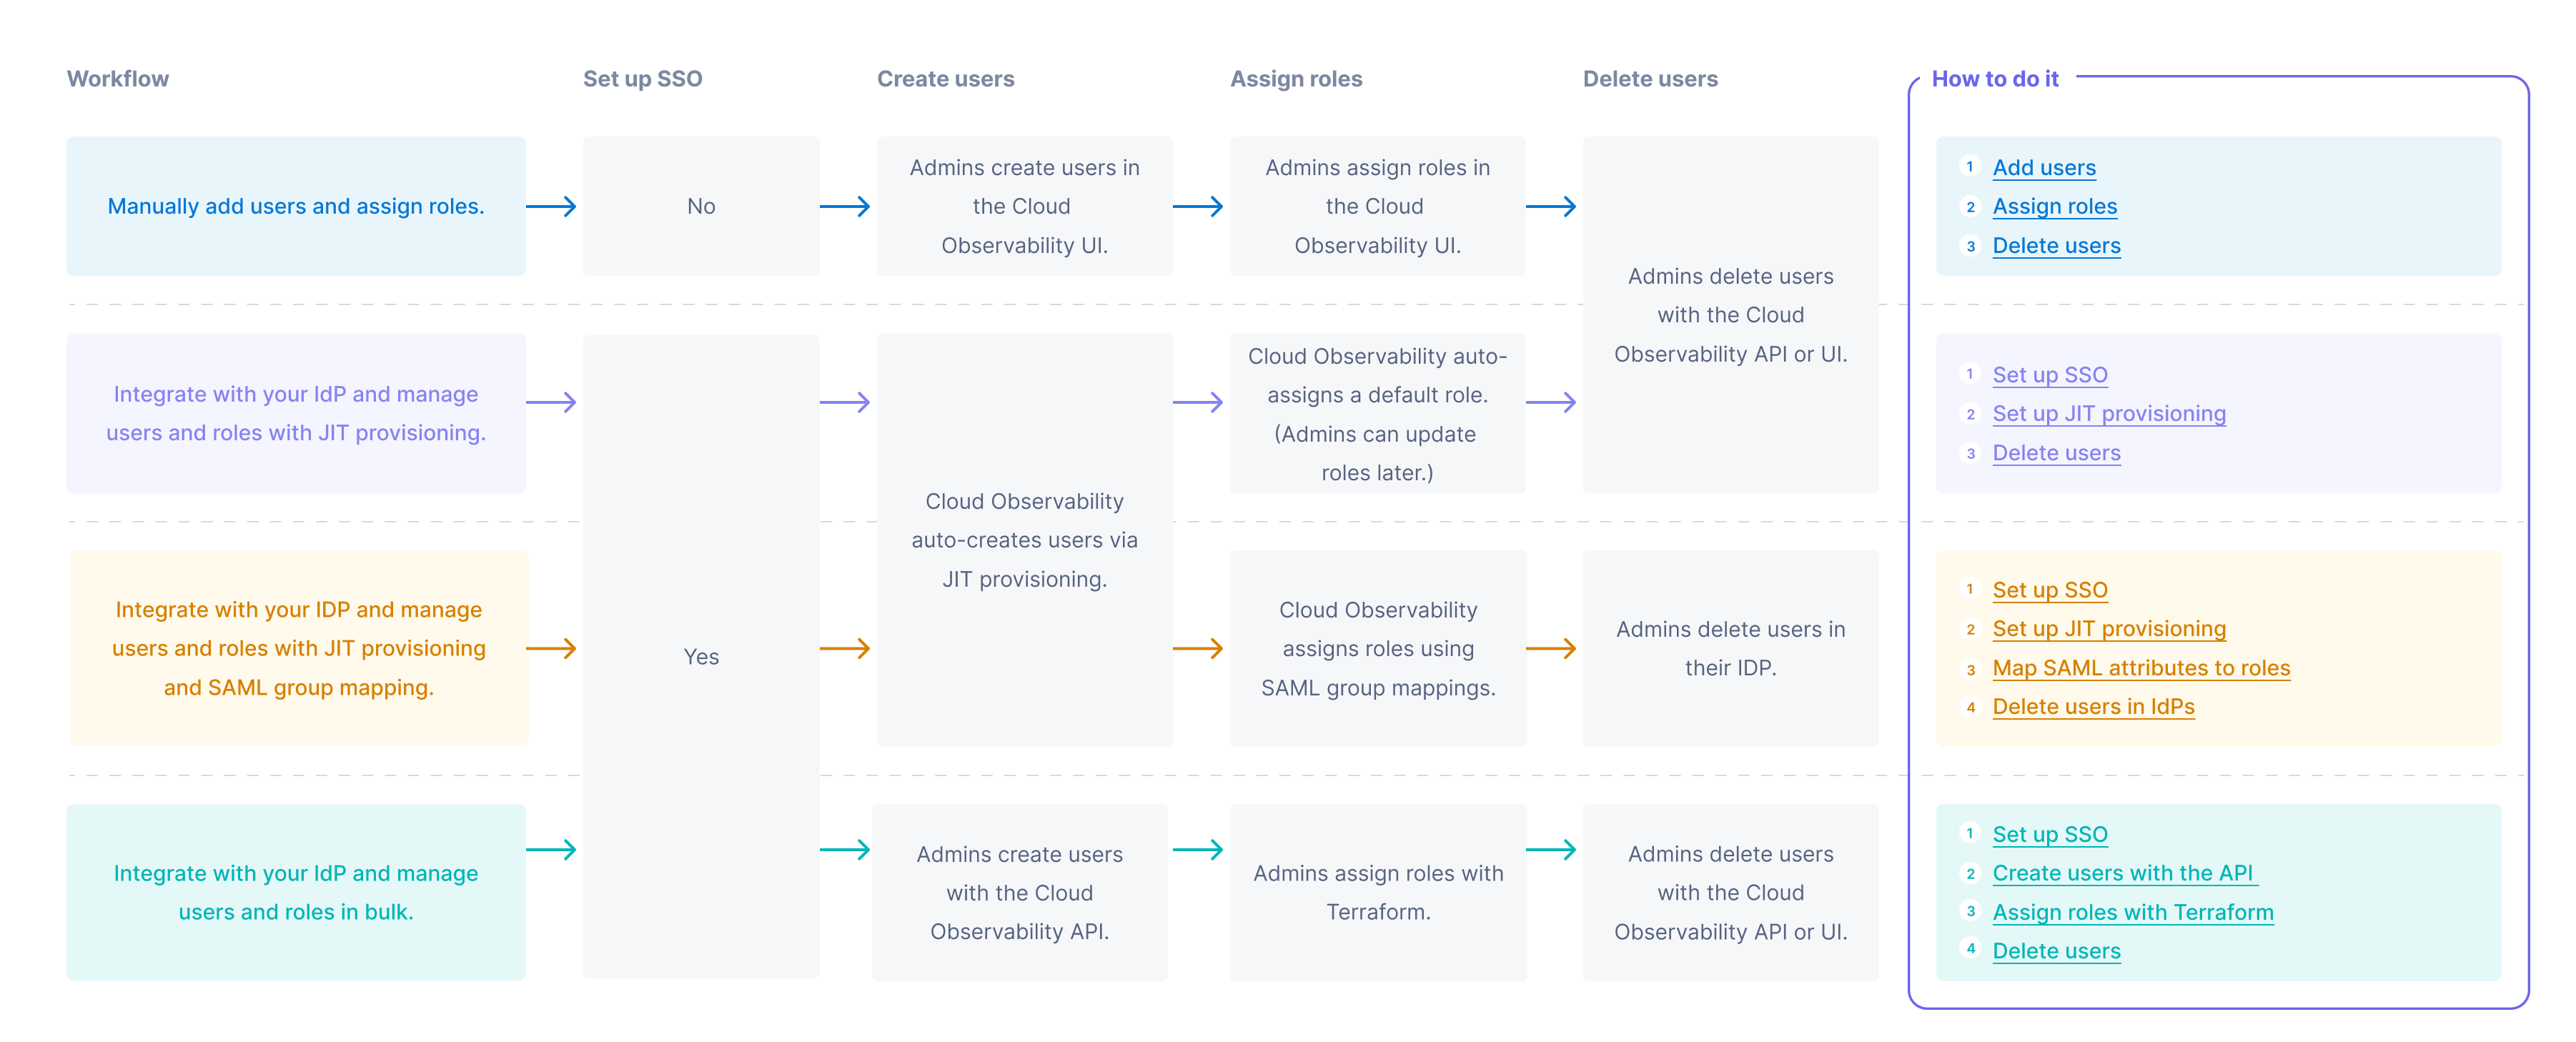 Workflows for managing users and roles